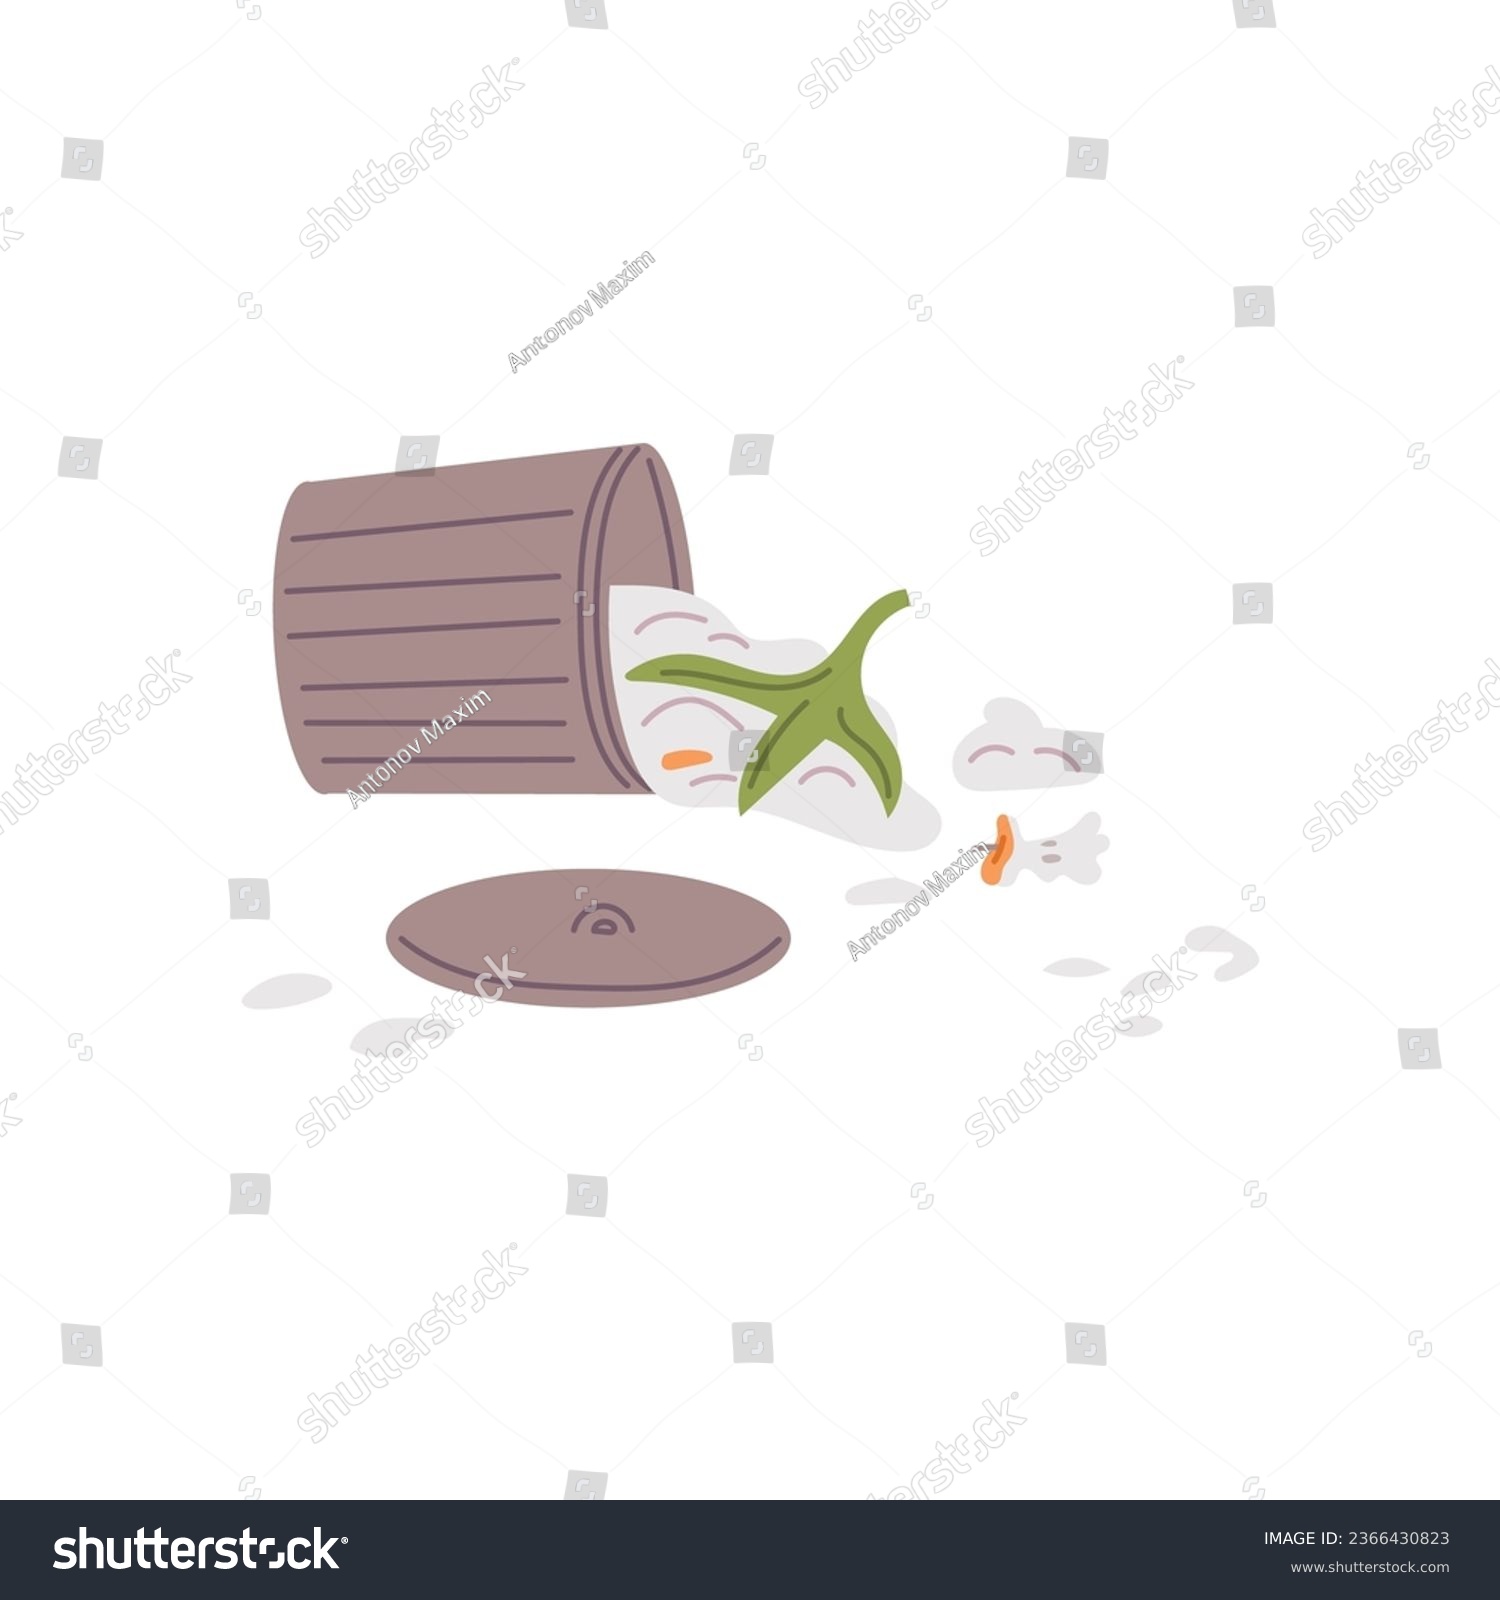 SVG of Pet mess and chaos. Overturned trash can, scattered garbage. Naughty mischievous dog or cat behavior. Bad unwanted inappropriate animal quirk. Flat vector illustration isolated on white background svg